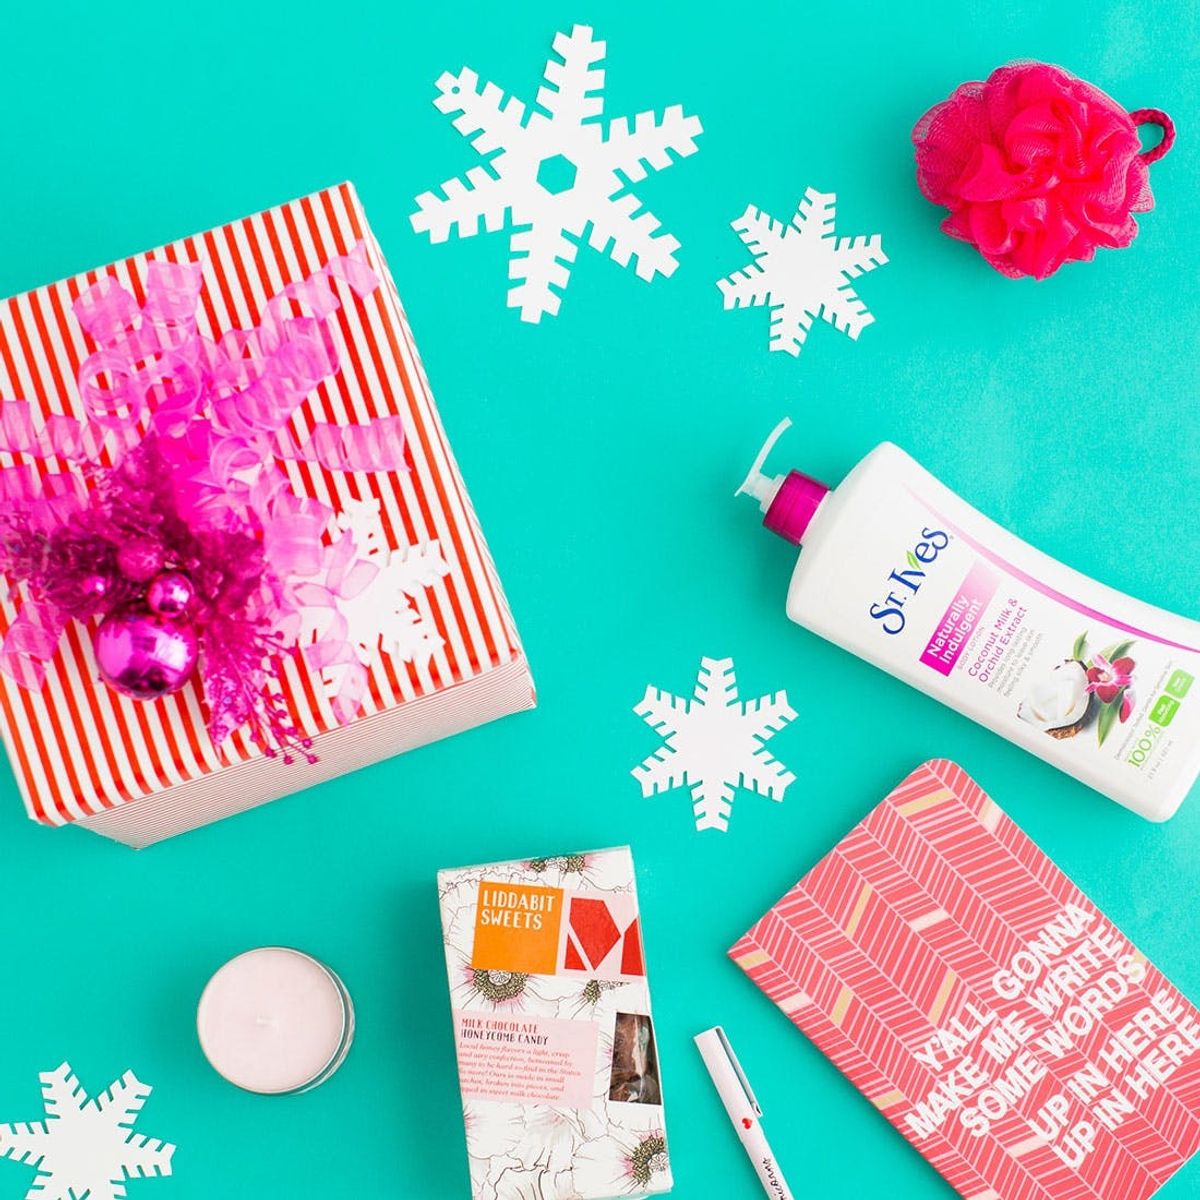 This Is the Best DIY Spa Gift for Your Favorite Gal Pal